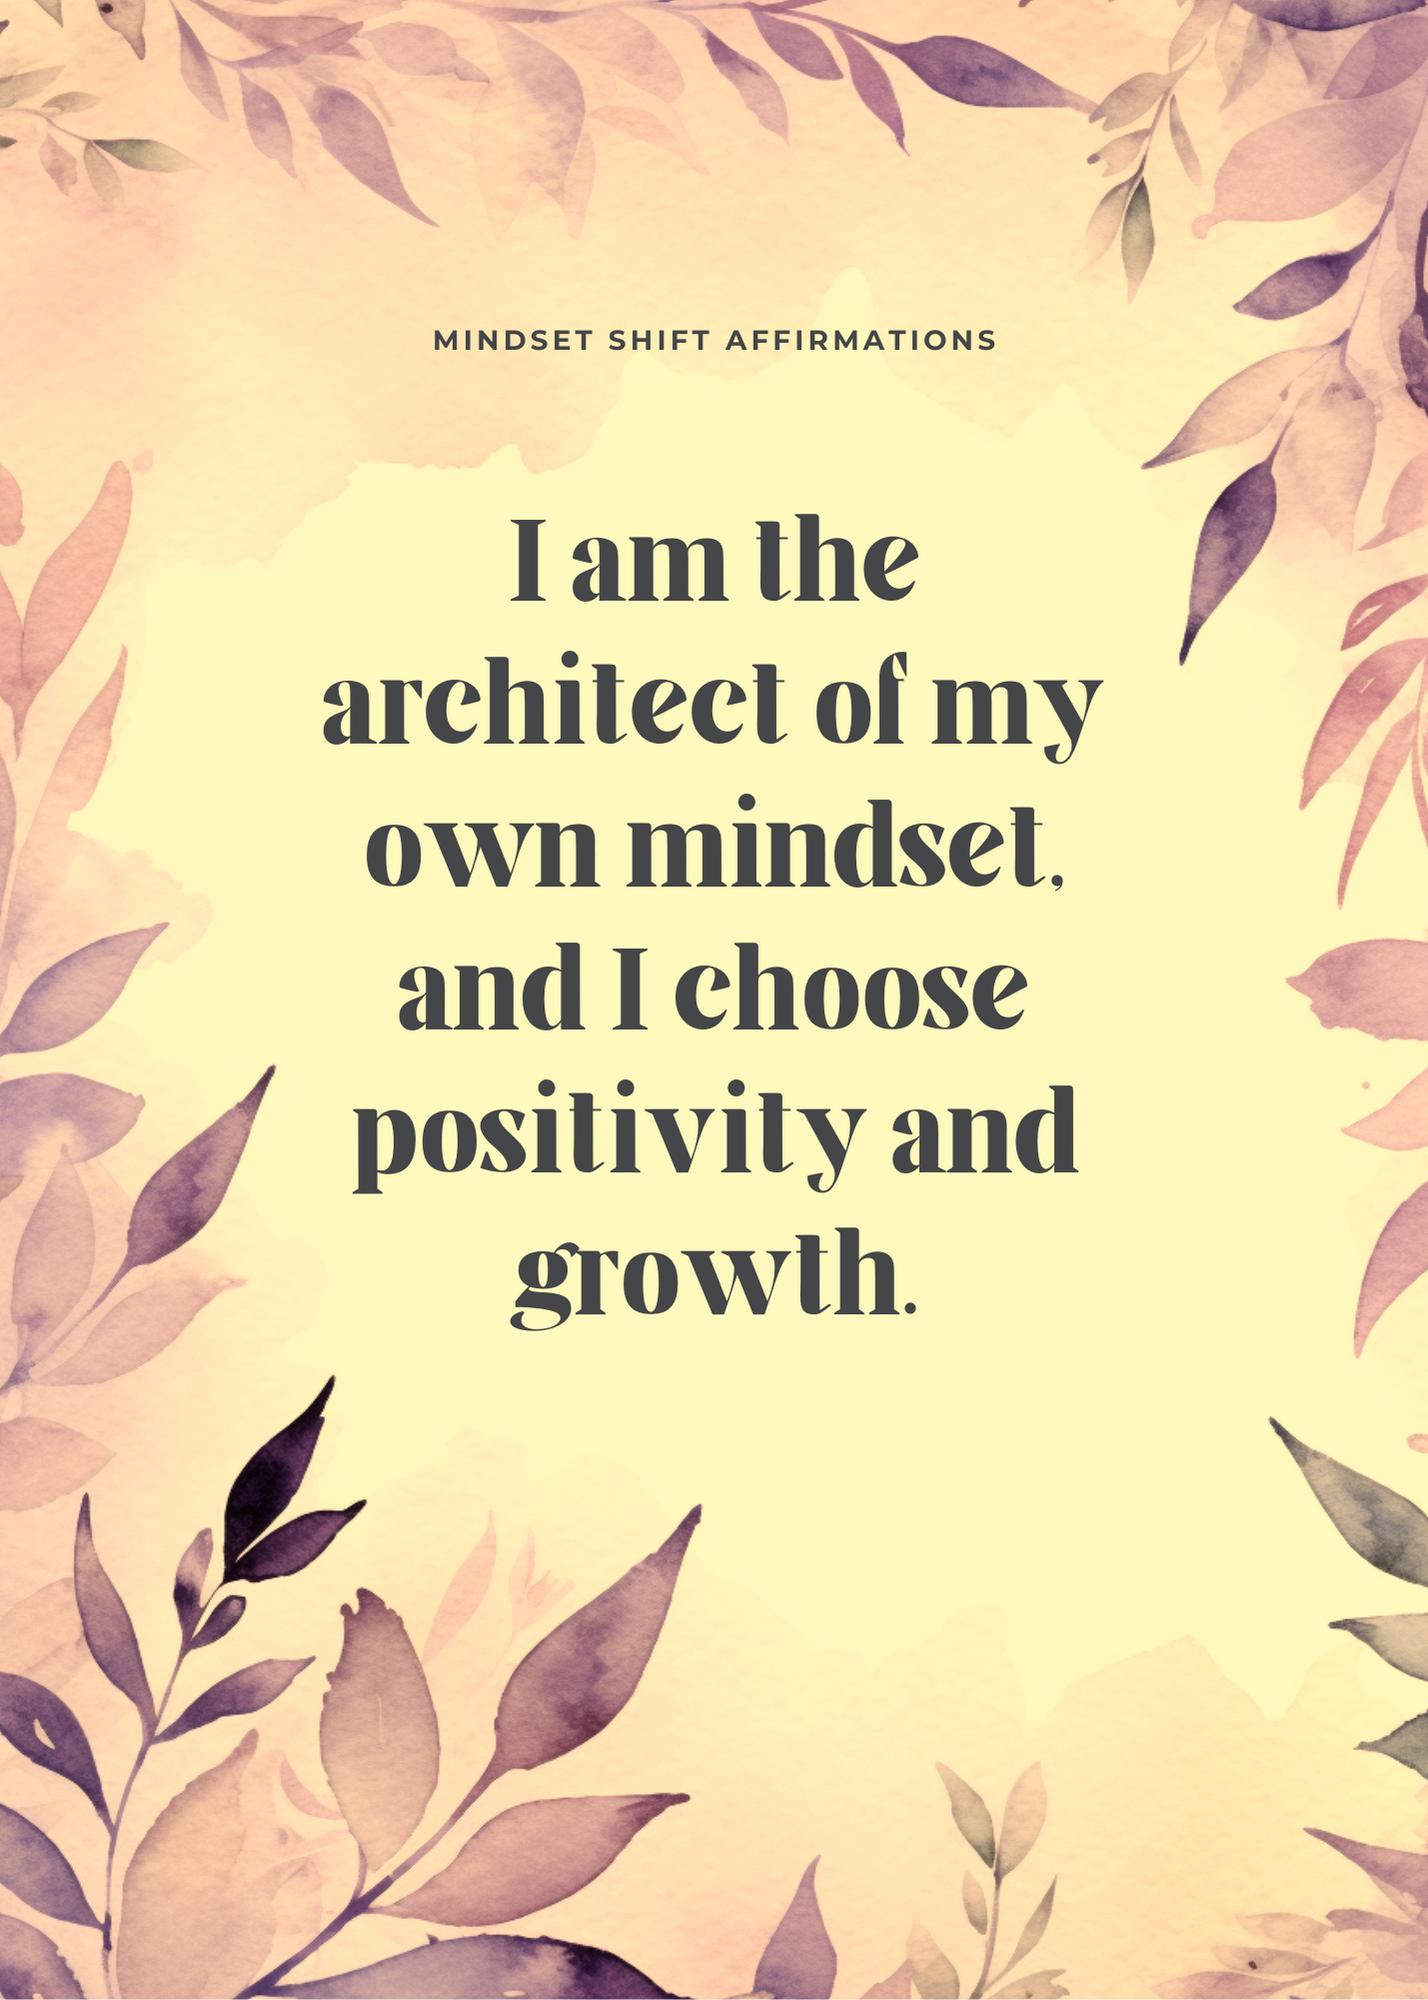 The Mindset Shift Journal and 30 Affirmations